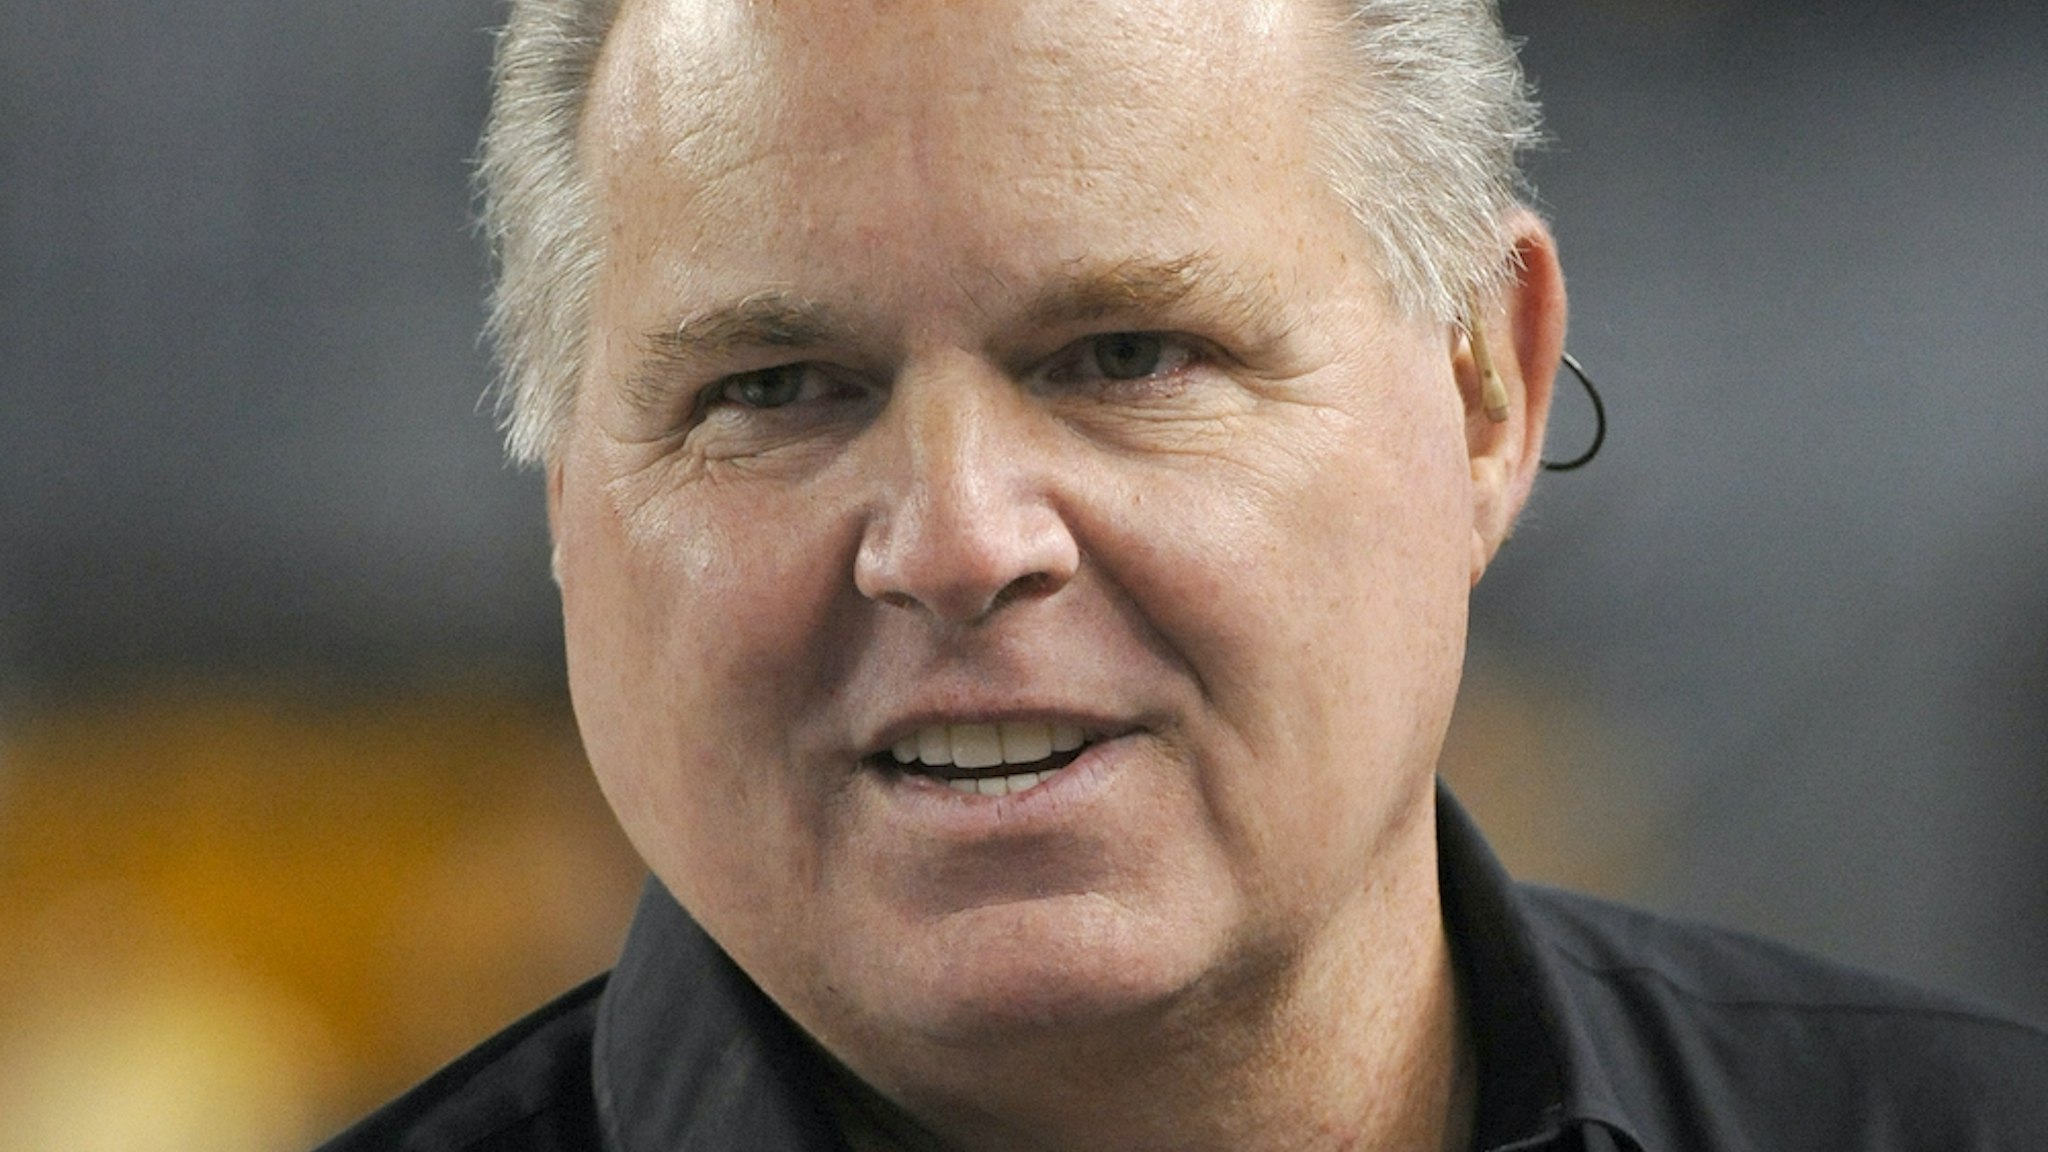 Radio talk show host and political commentator Rush Limbaugh looks on from the sideline before a National Football League game between the New England Patriots and Pittsburgh Steelers at Heinz Field on November 14, 2010 in Pittsburgh, Pennsylvania. The Patriots defeated the Steelers 39-26. (Photo by George Gojkovich/Getty Images)